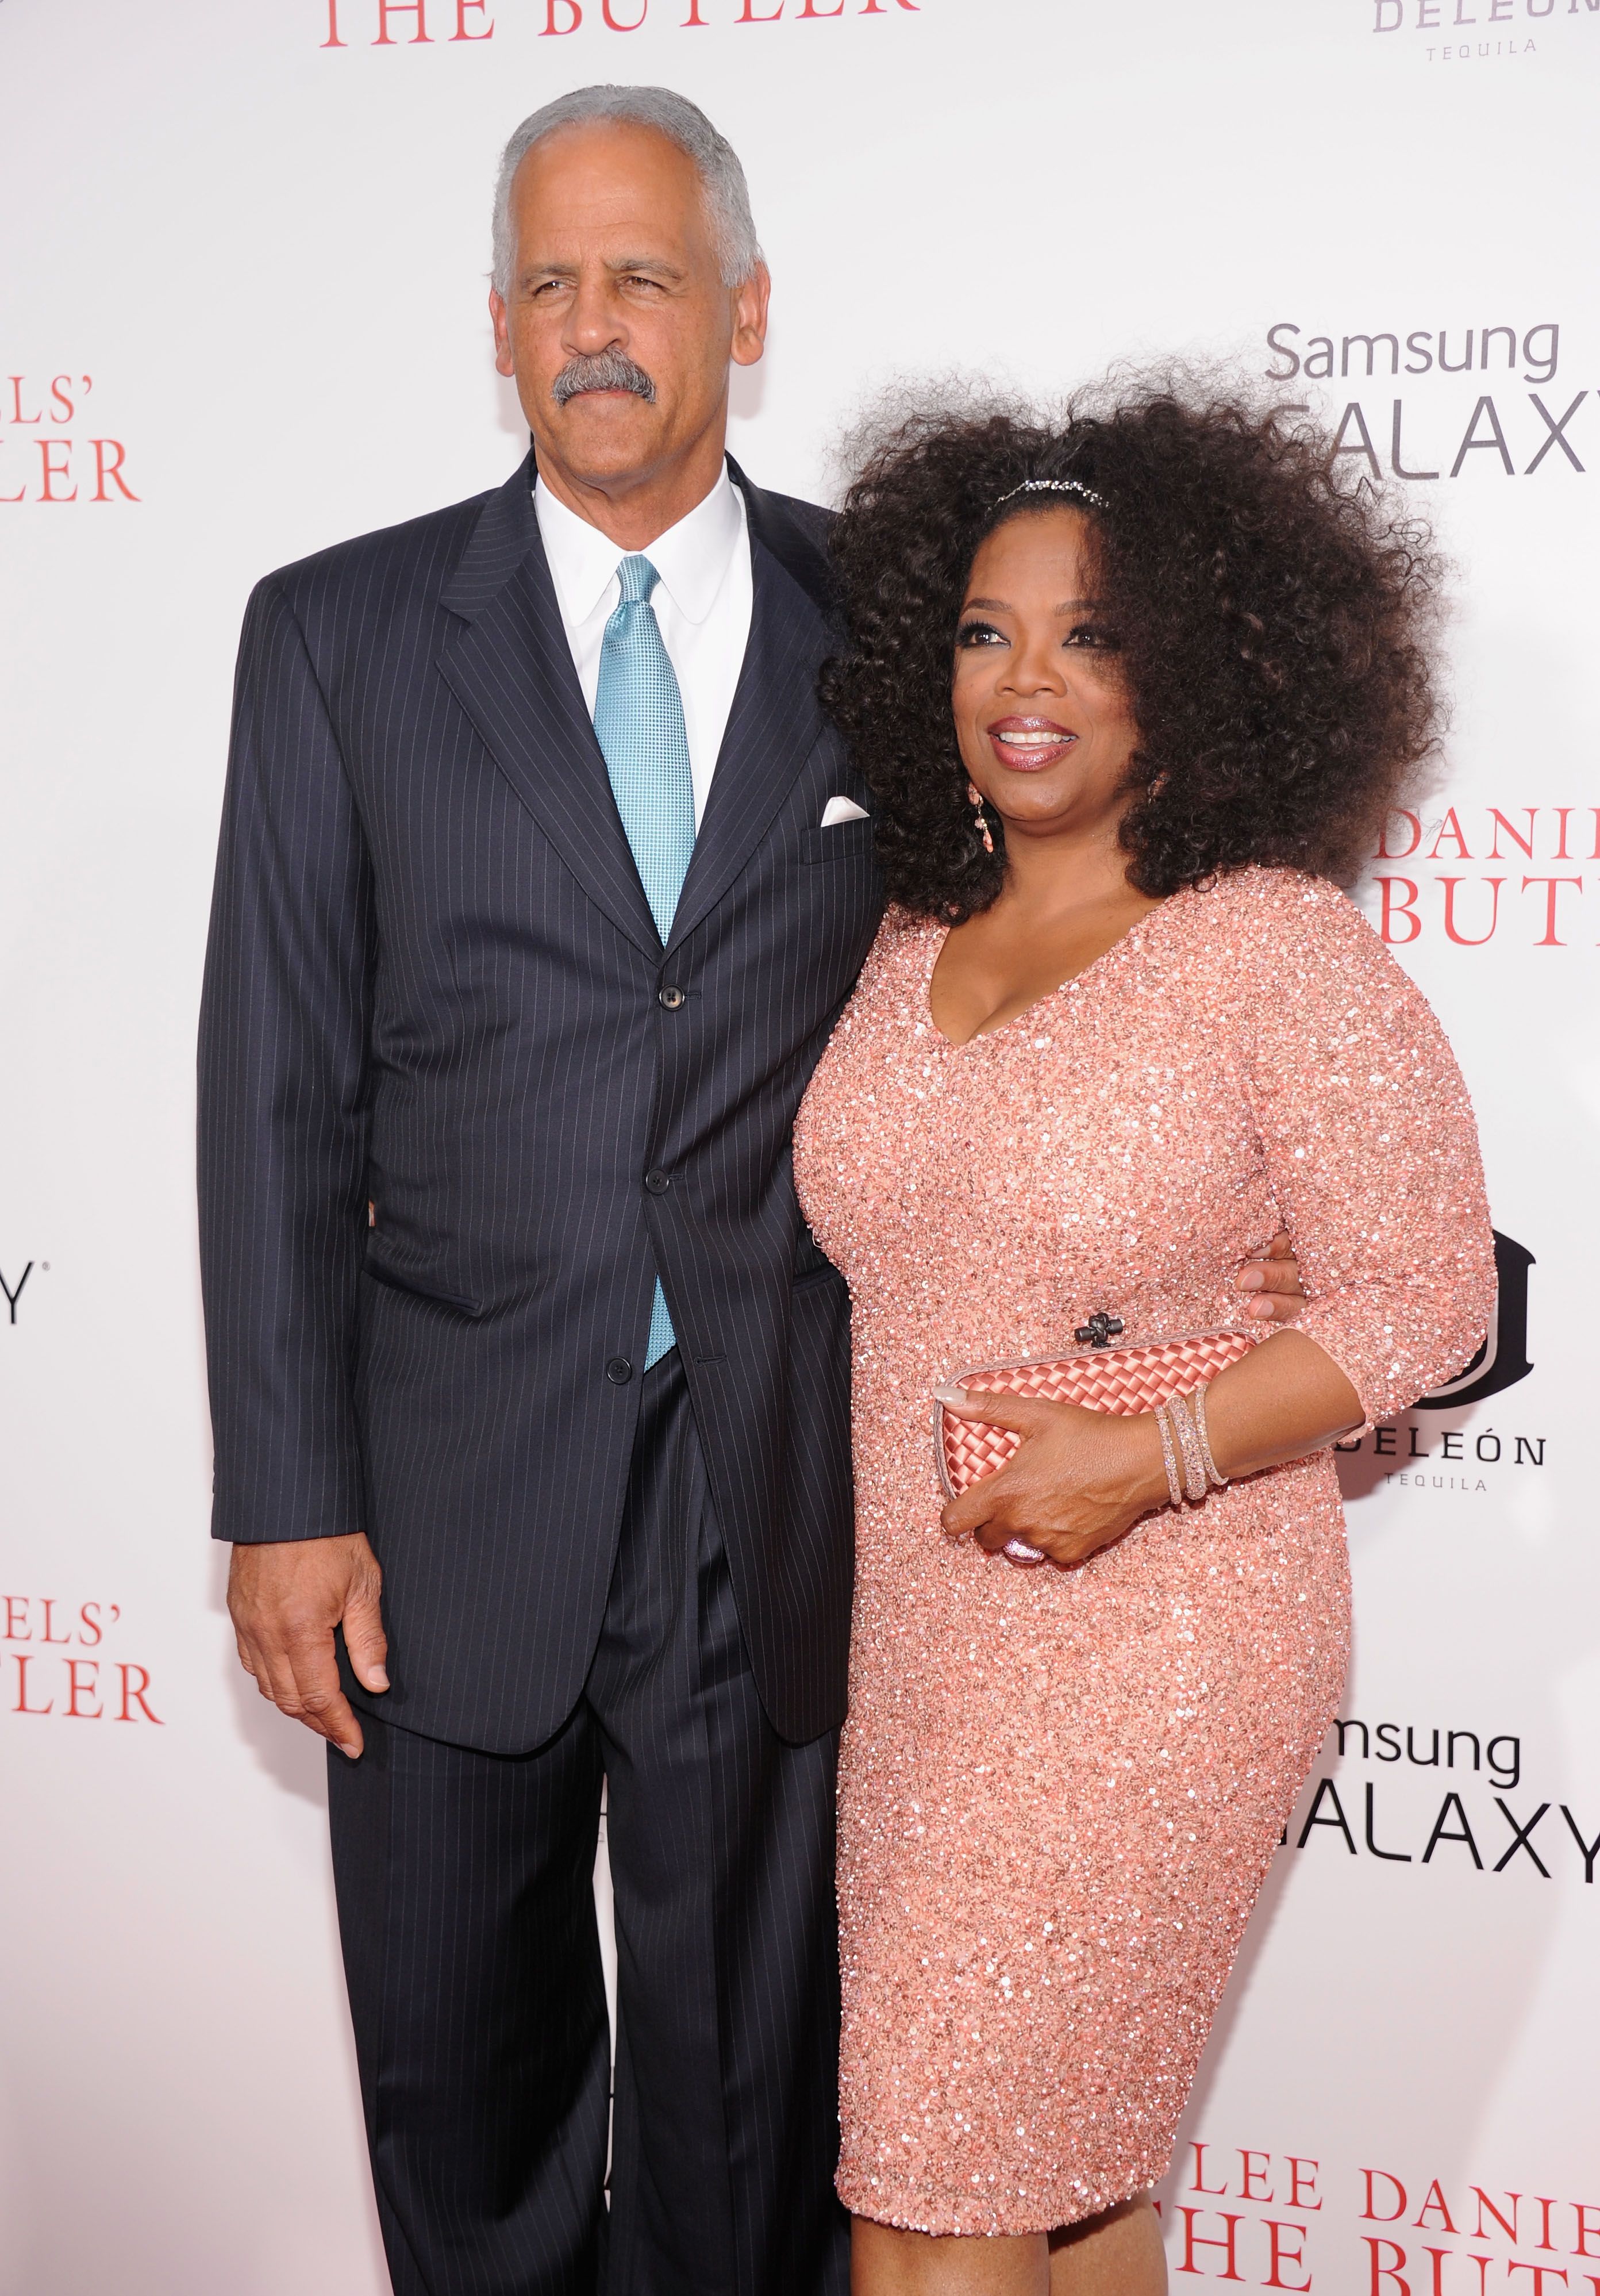 Oprah Winfrey and Stedman Graham attend Lee Daniels' "The Butler" New York Premiere | Source: Getty Images